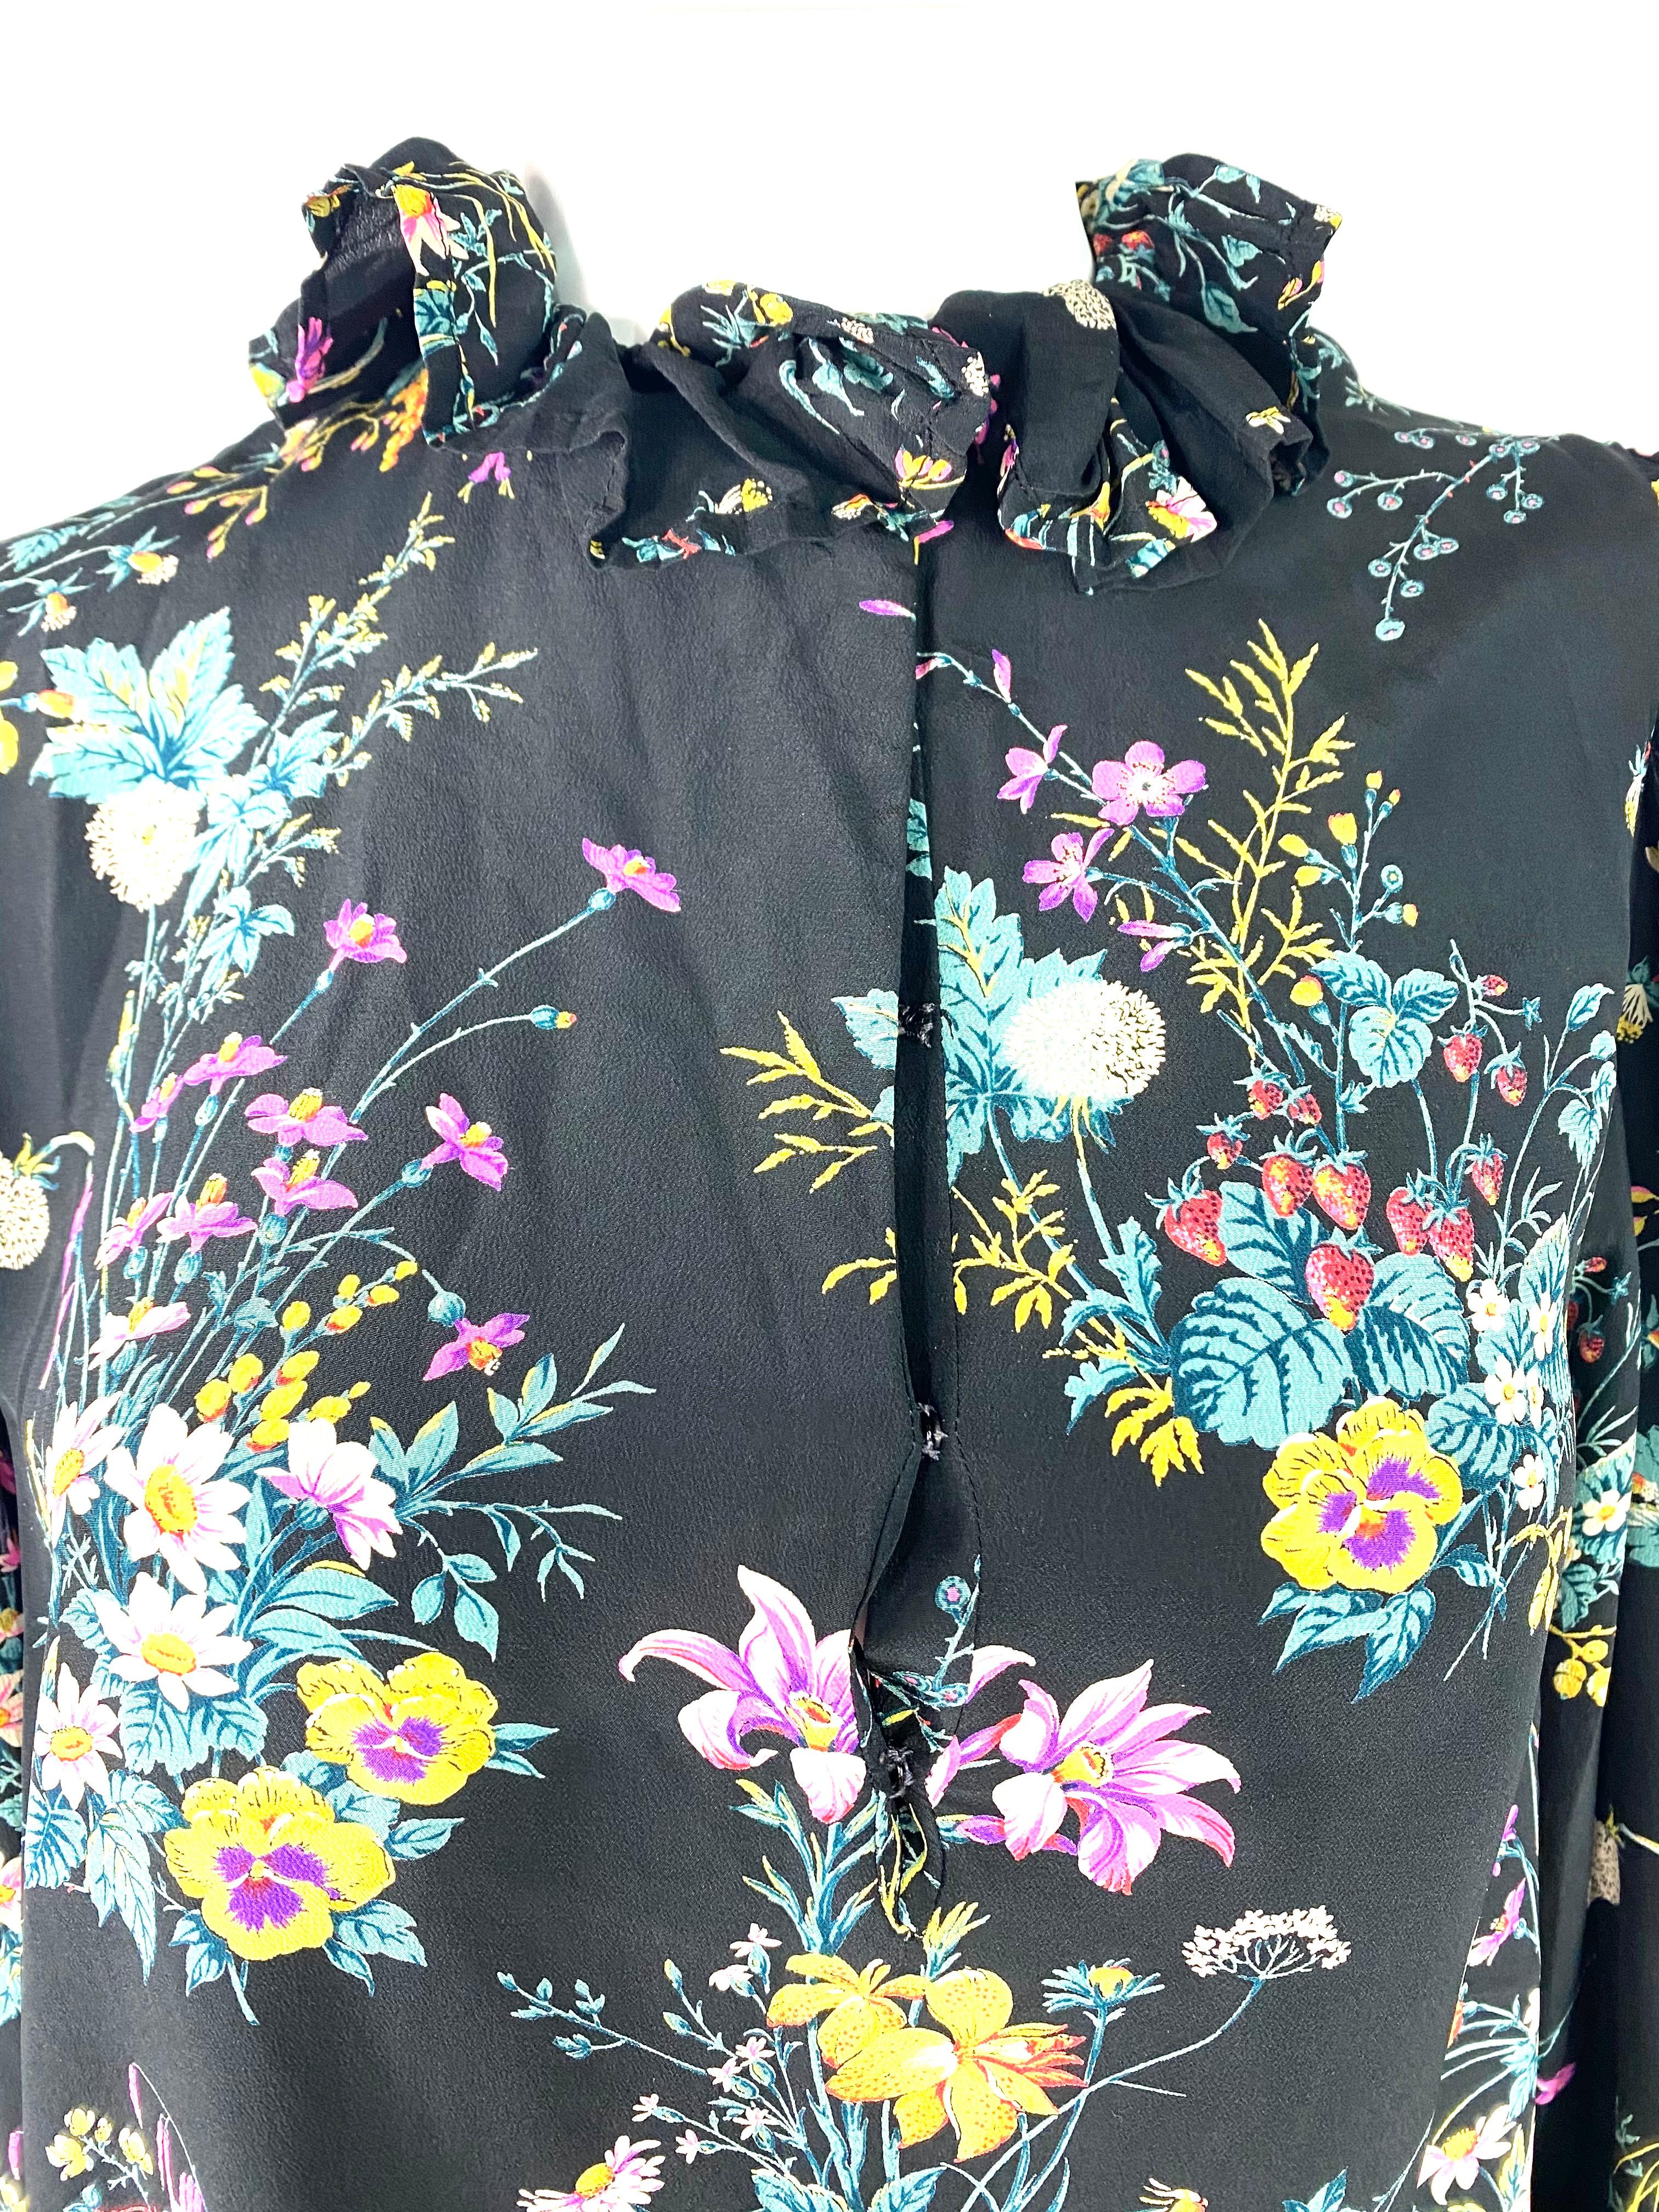 Product details:

The dress features floral and fruity print on the black background, mini length, side pockets, long sleeves, ruffled collar detail. Made in France.